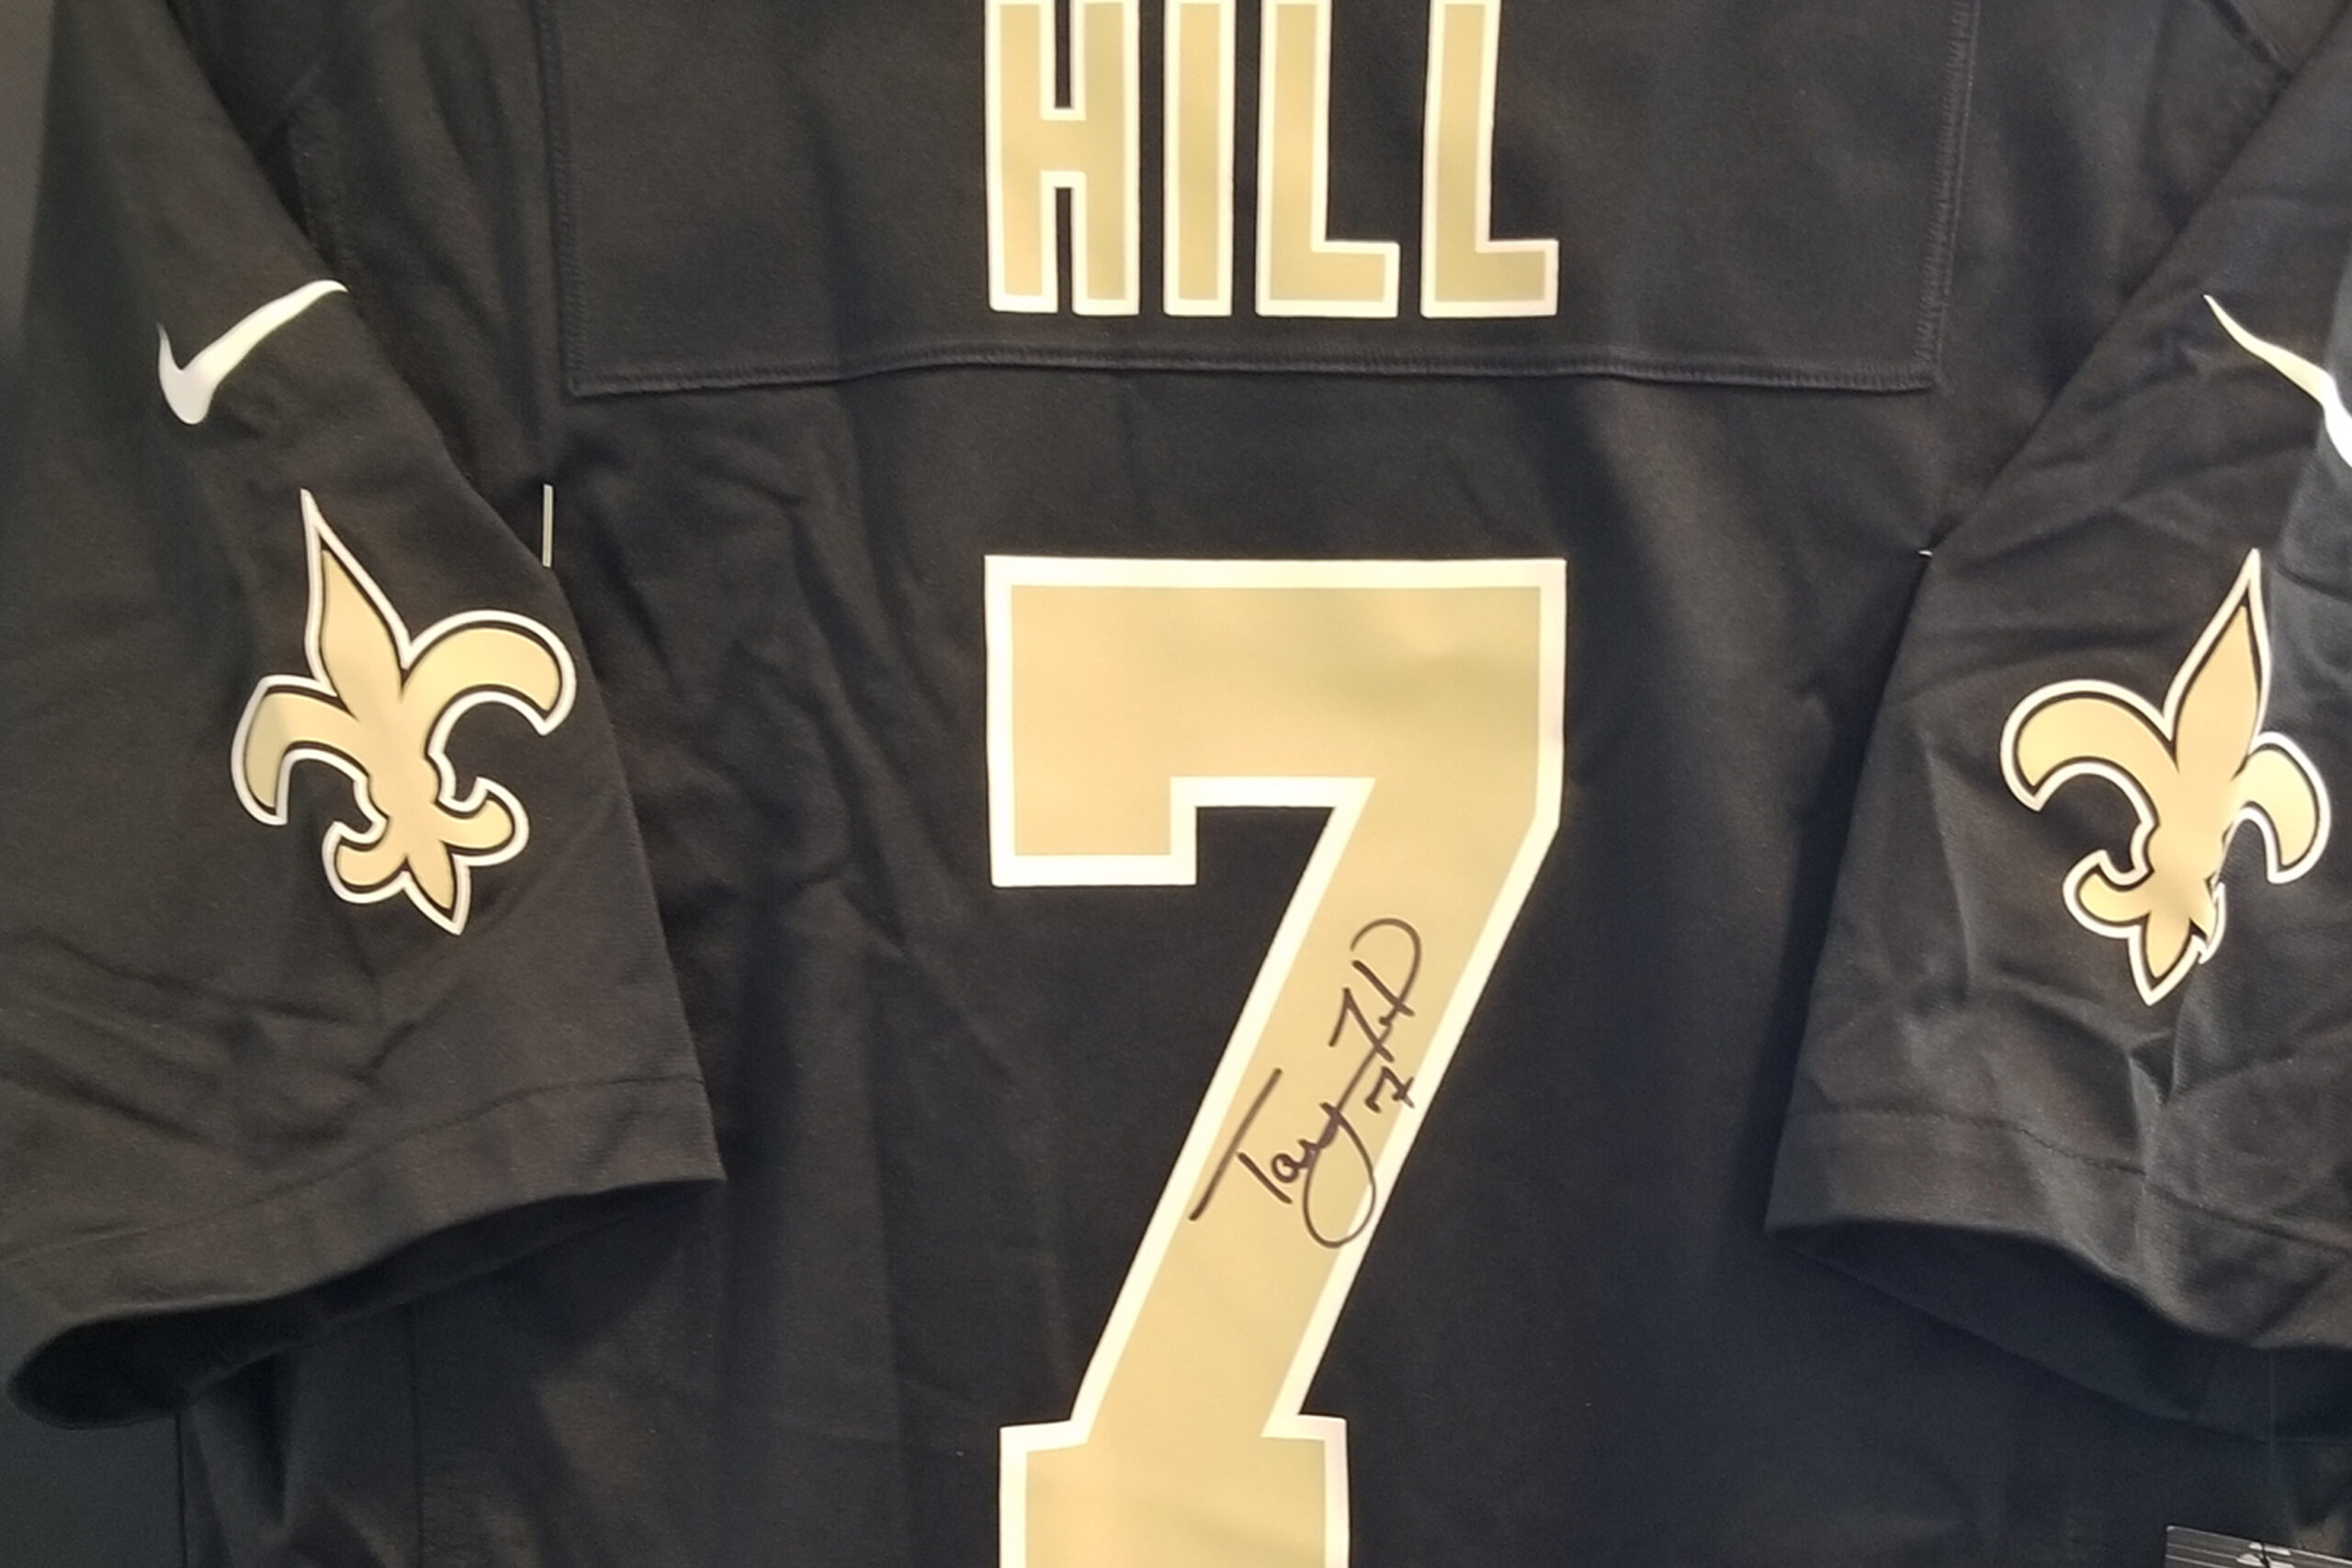 Saints Jersey – Signed by Taysom Hill – Black Tie Auctions